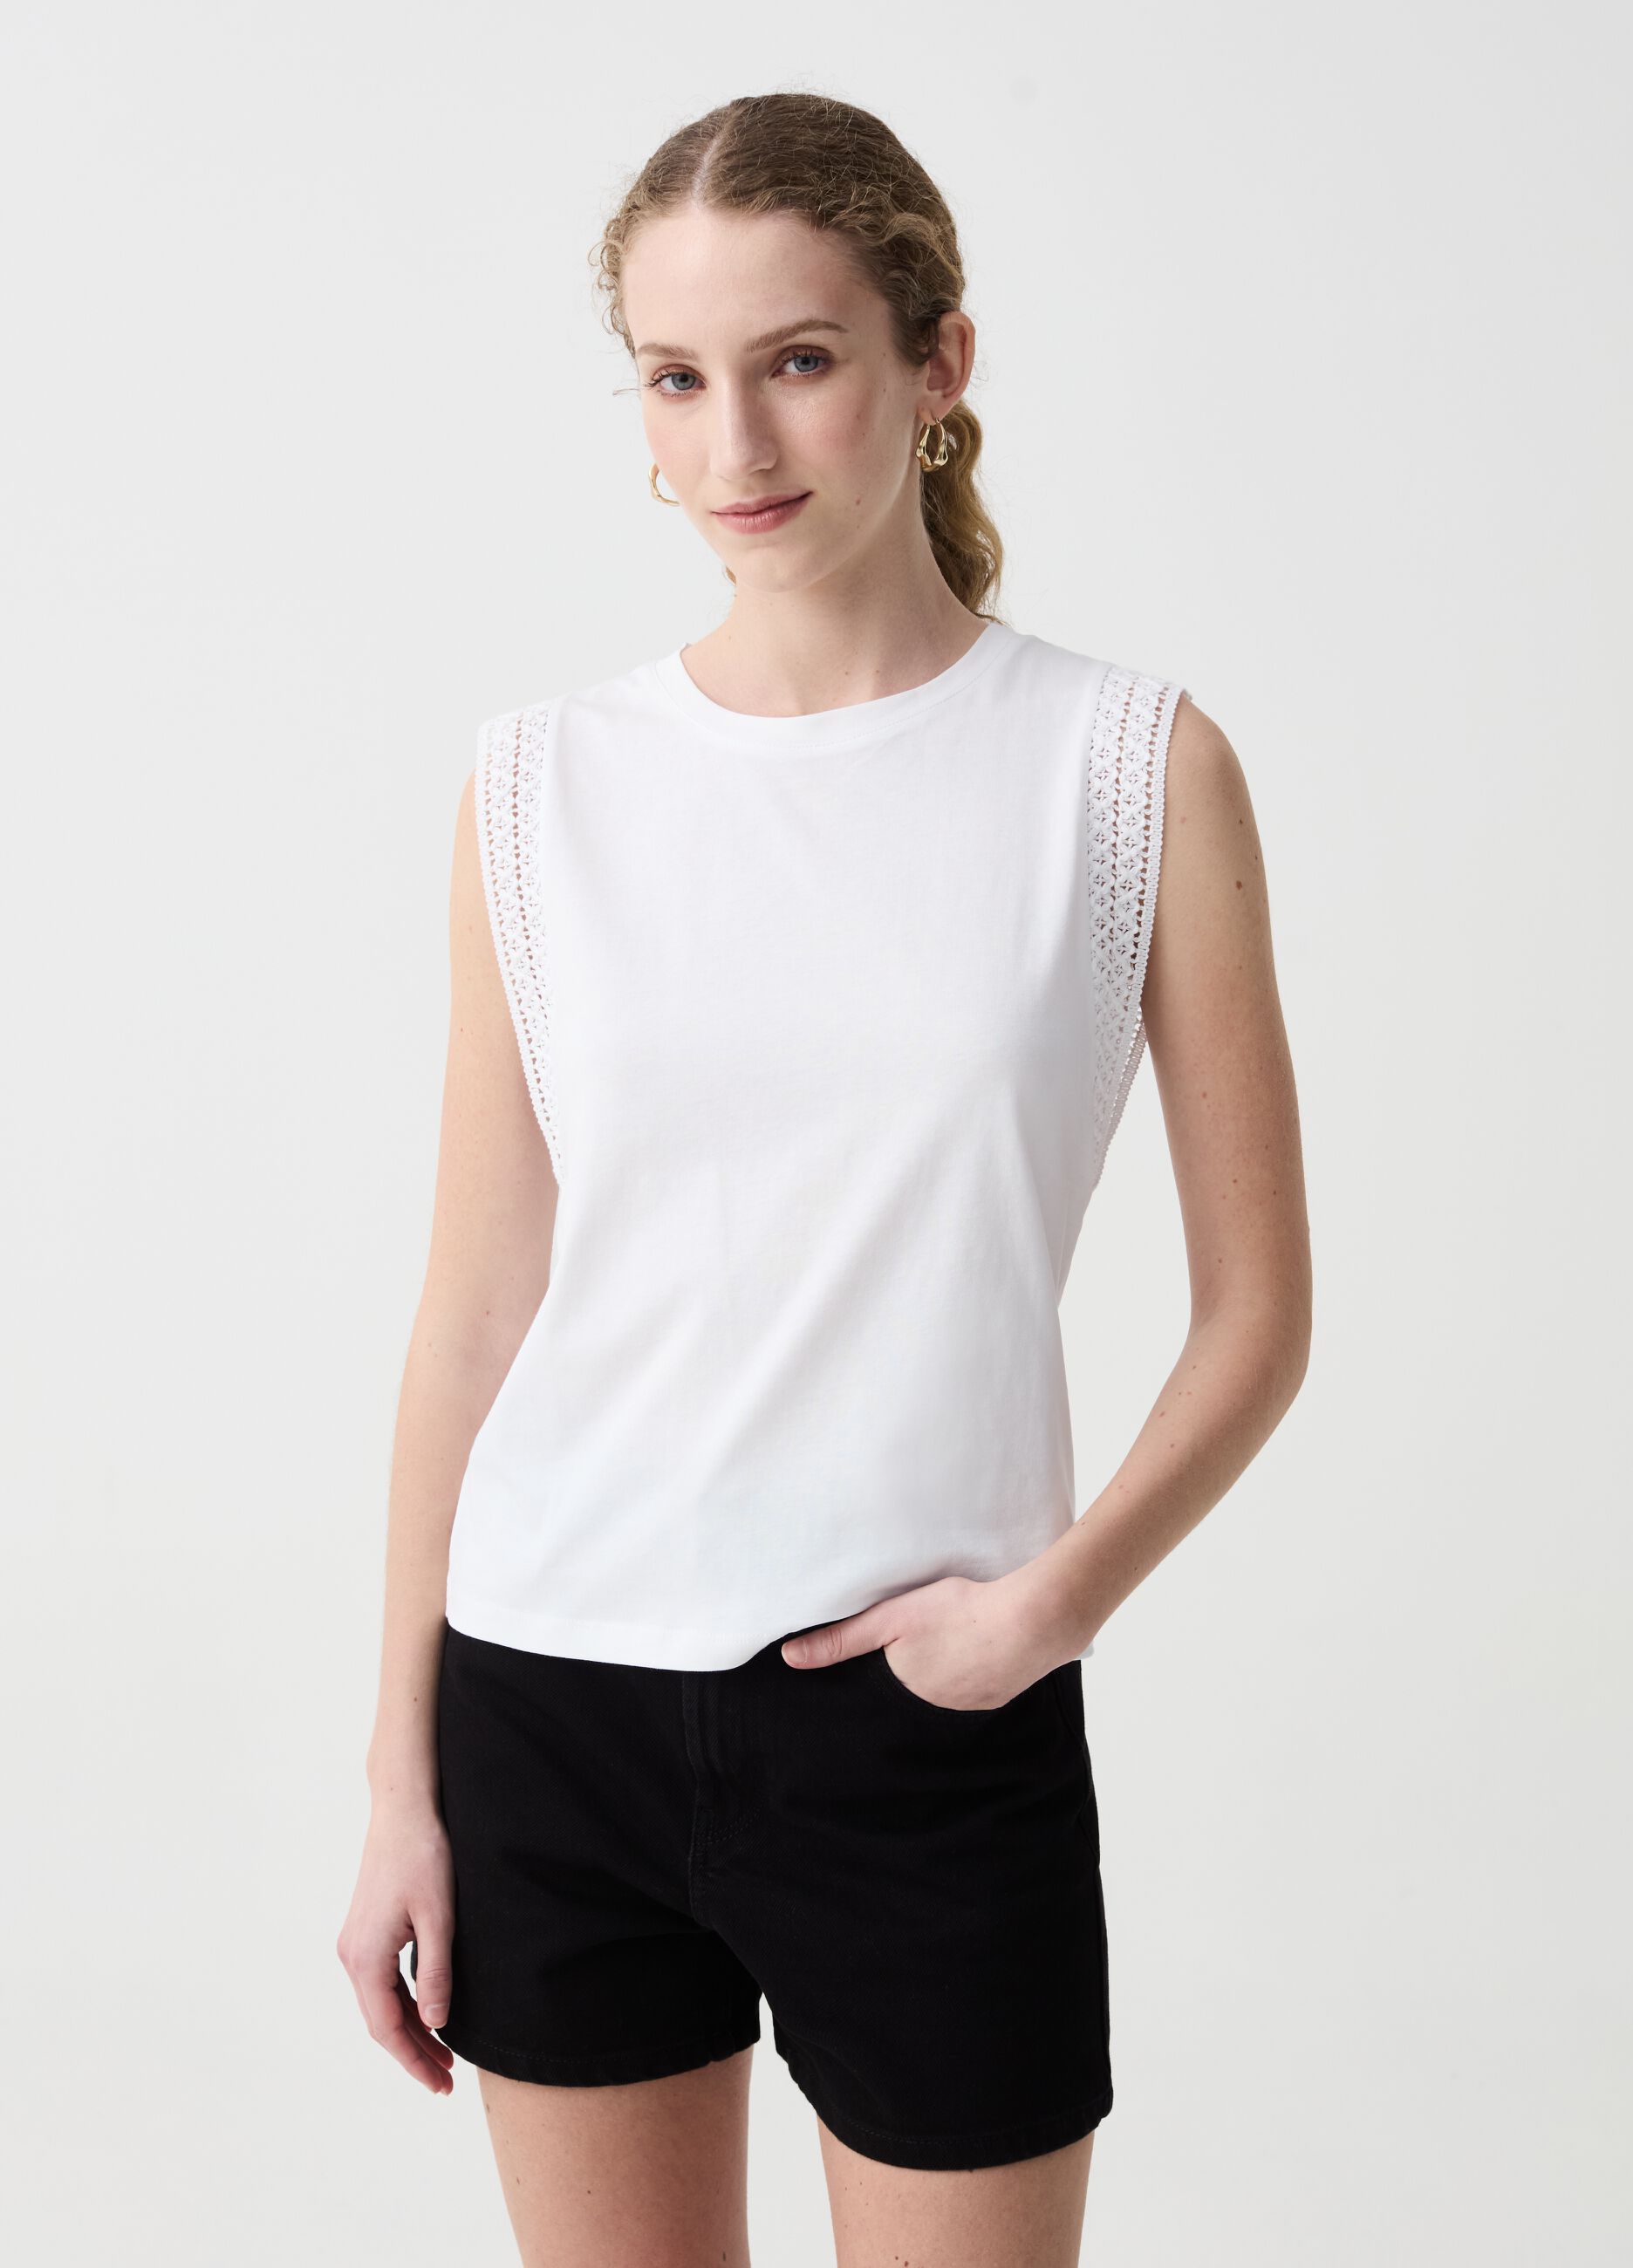 Sleeveless top with embroidered trims